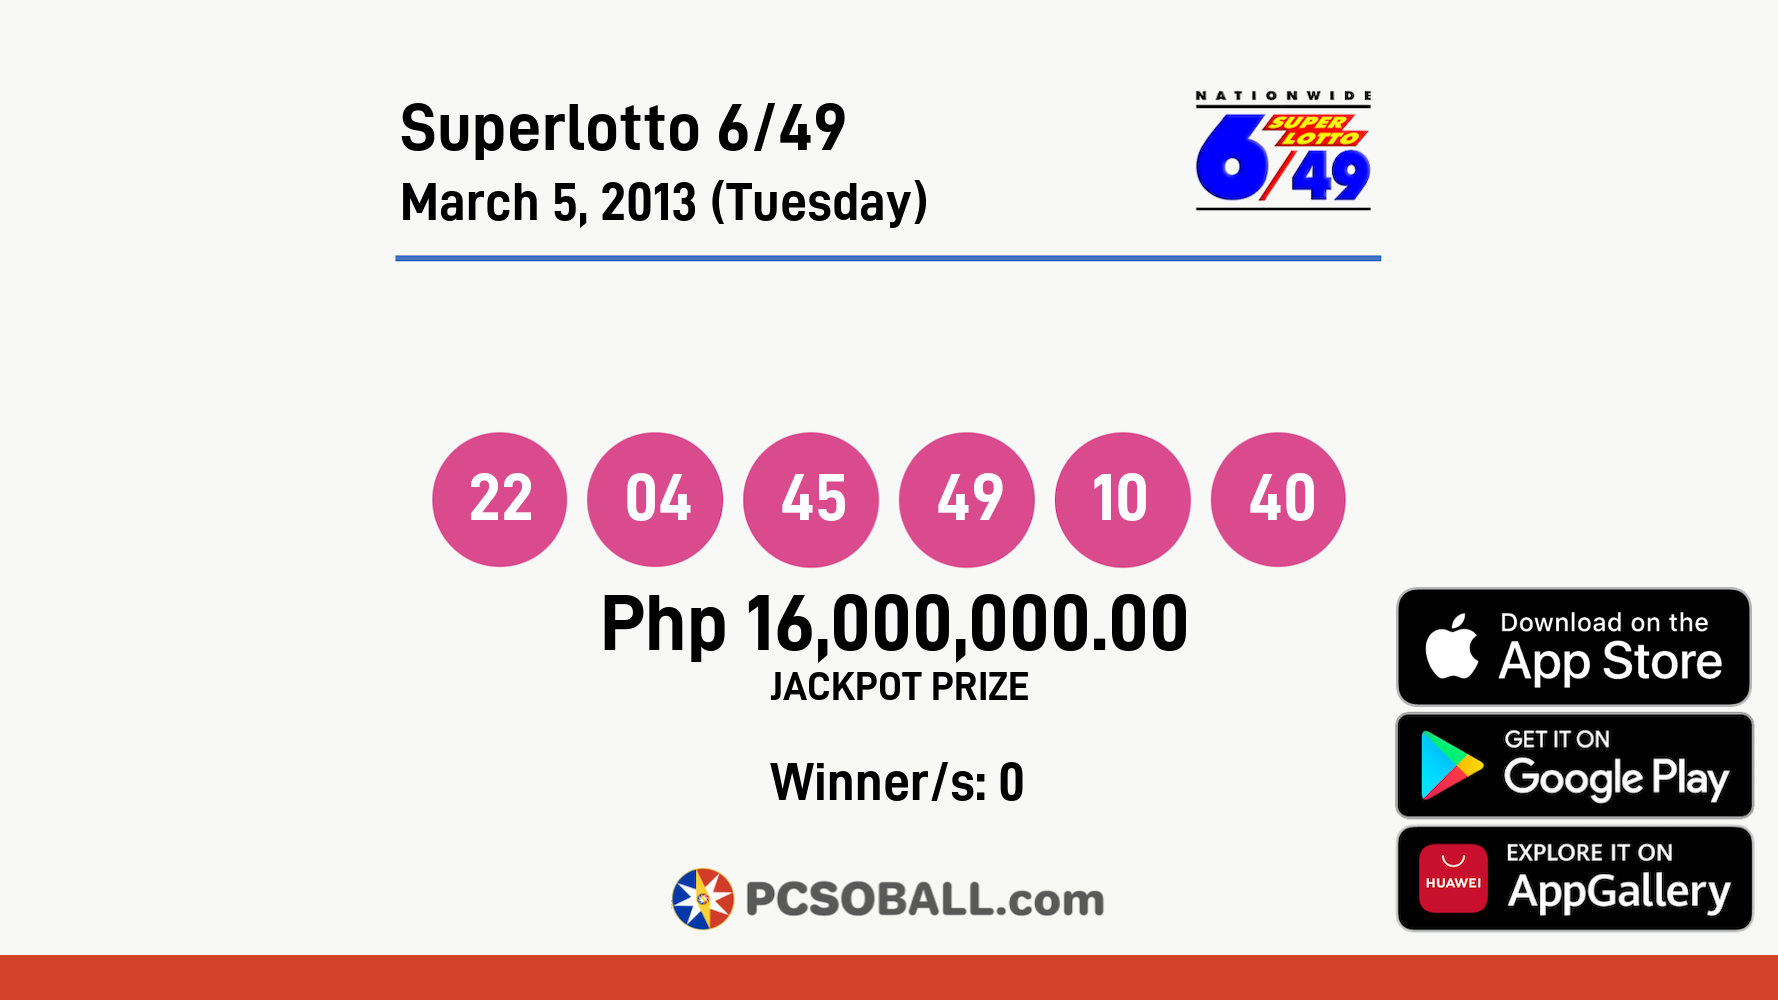 Superlotto 6/49 March 5, 2013 (Tuesday) Result